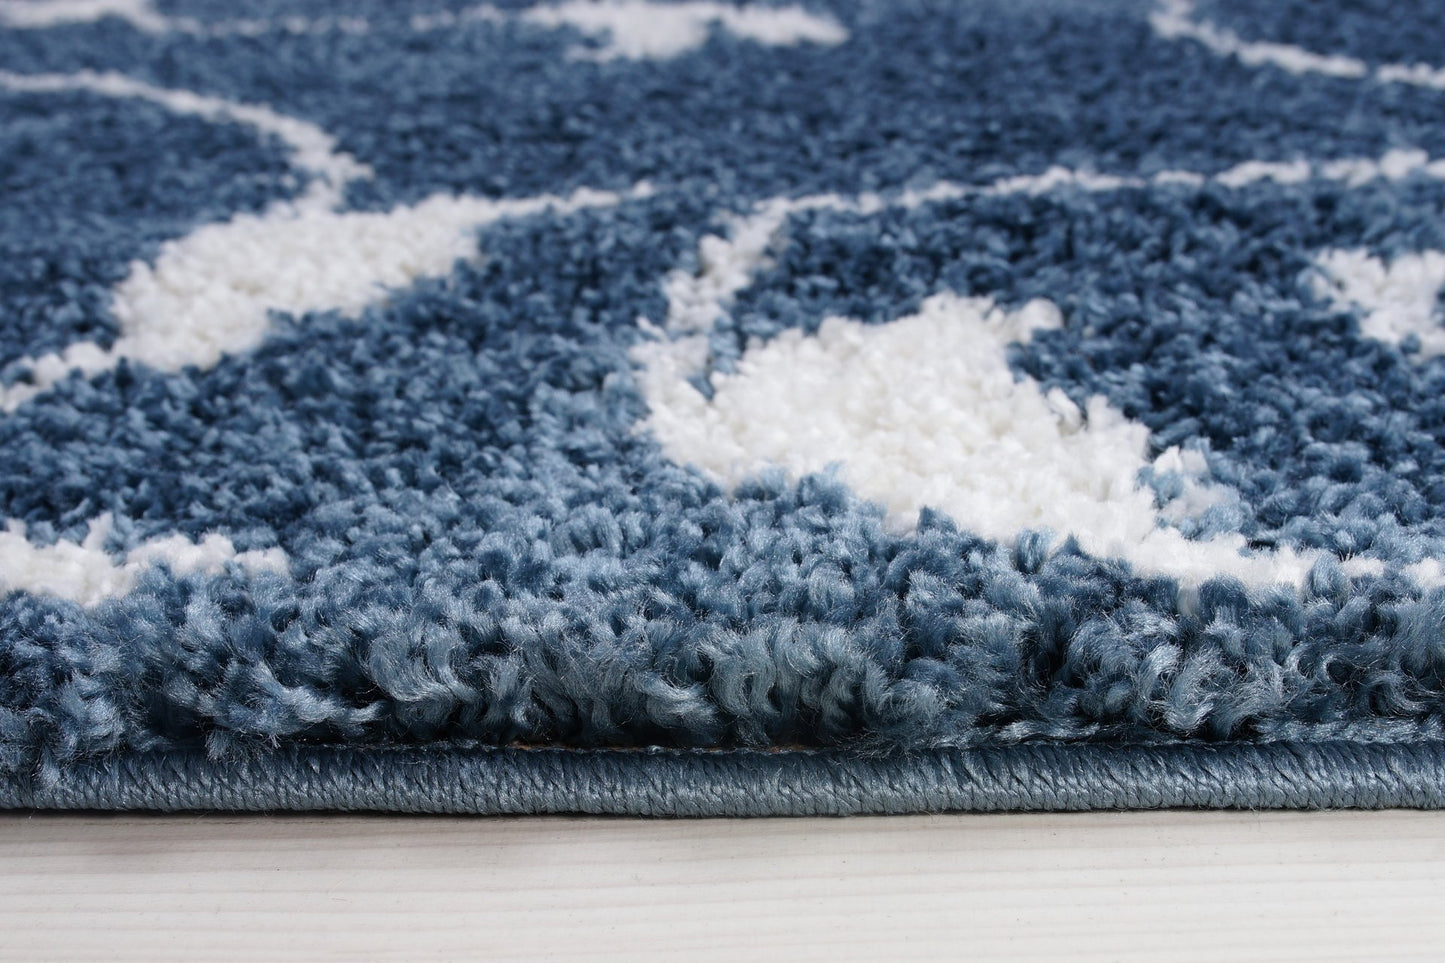 Shaggy Rabat Abstract Pattern Sustainable Spirals Style Rug in Blue White